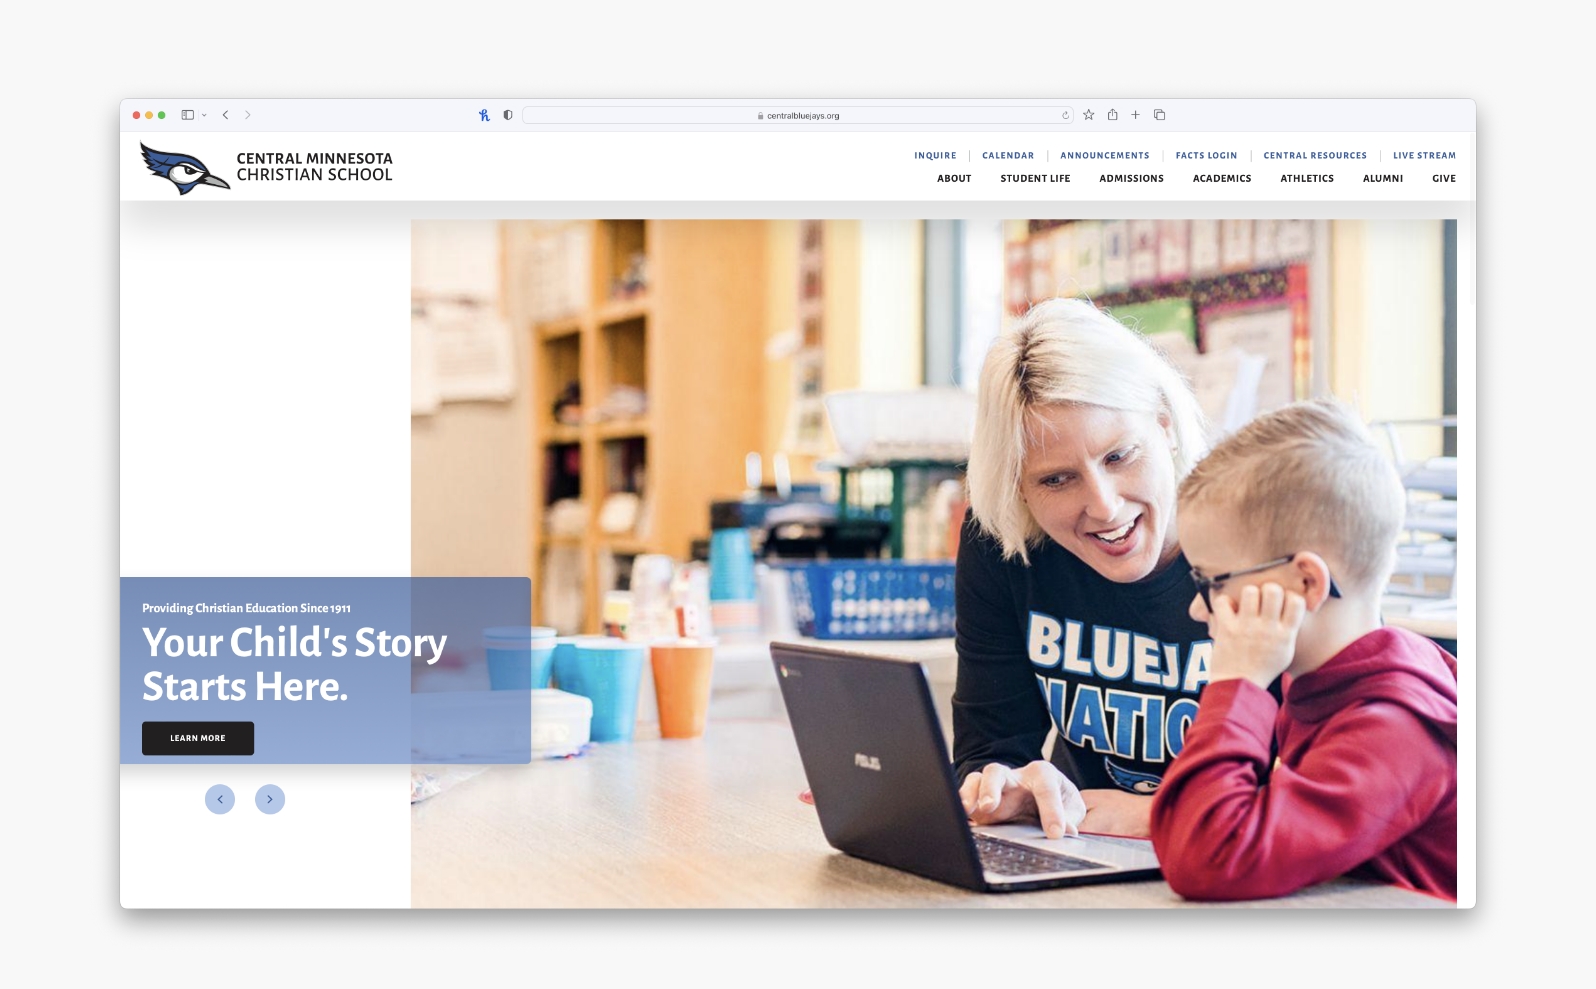 Central Minnesota Christian School Launches New Website